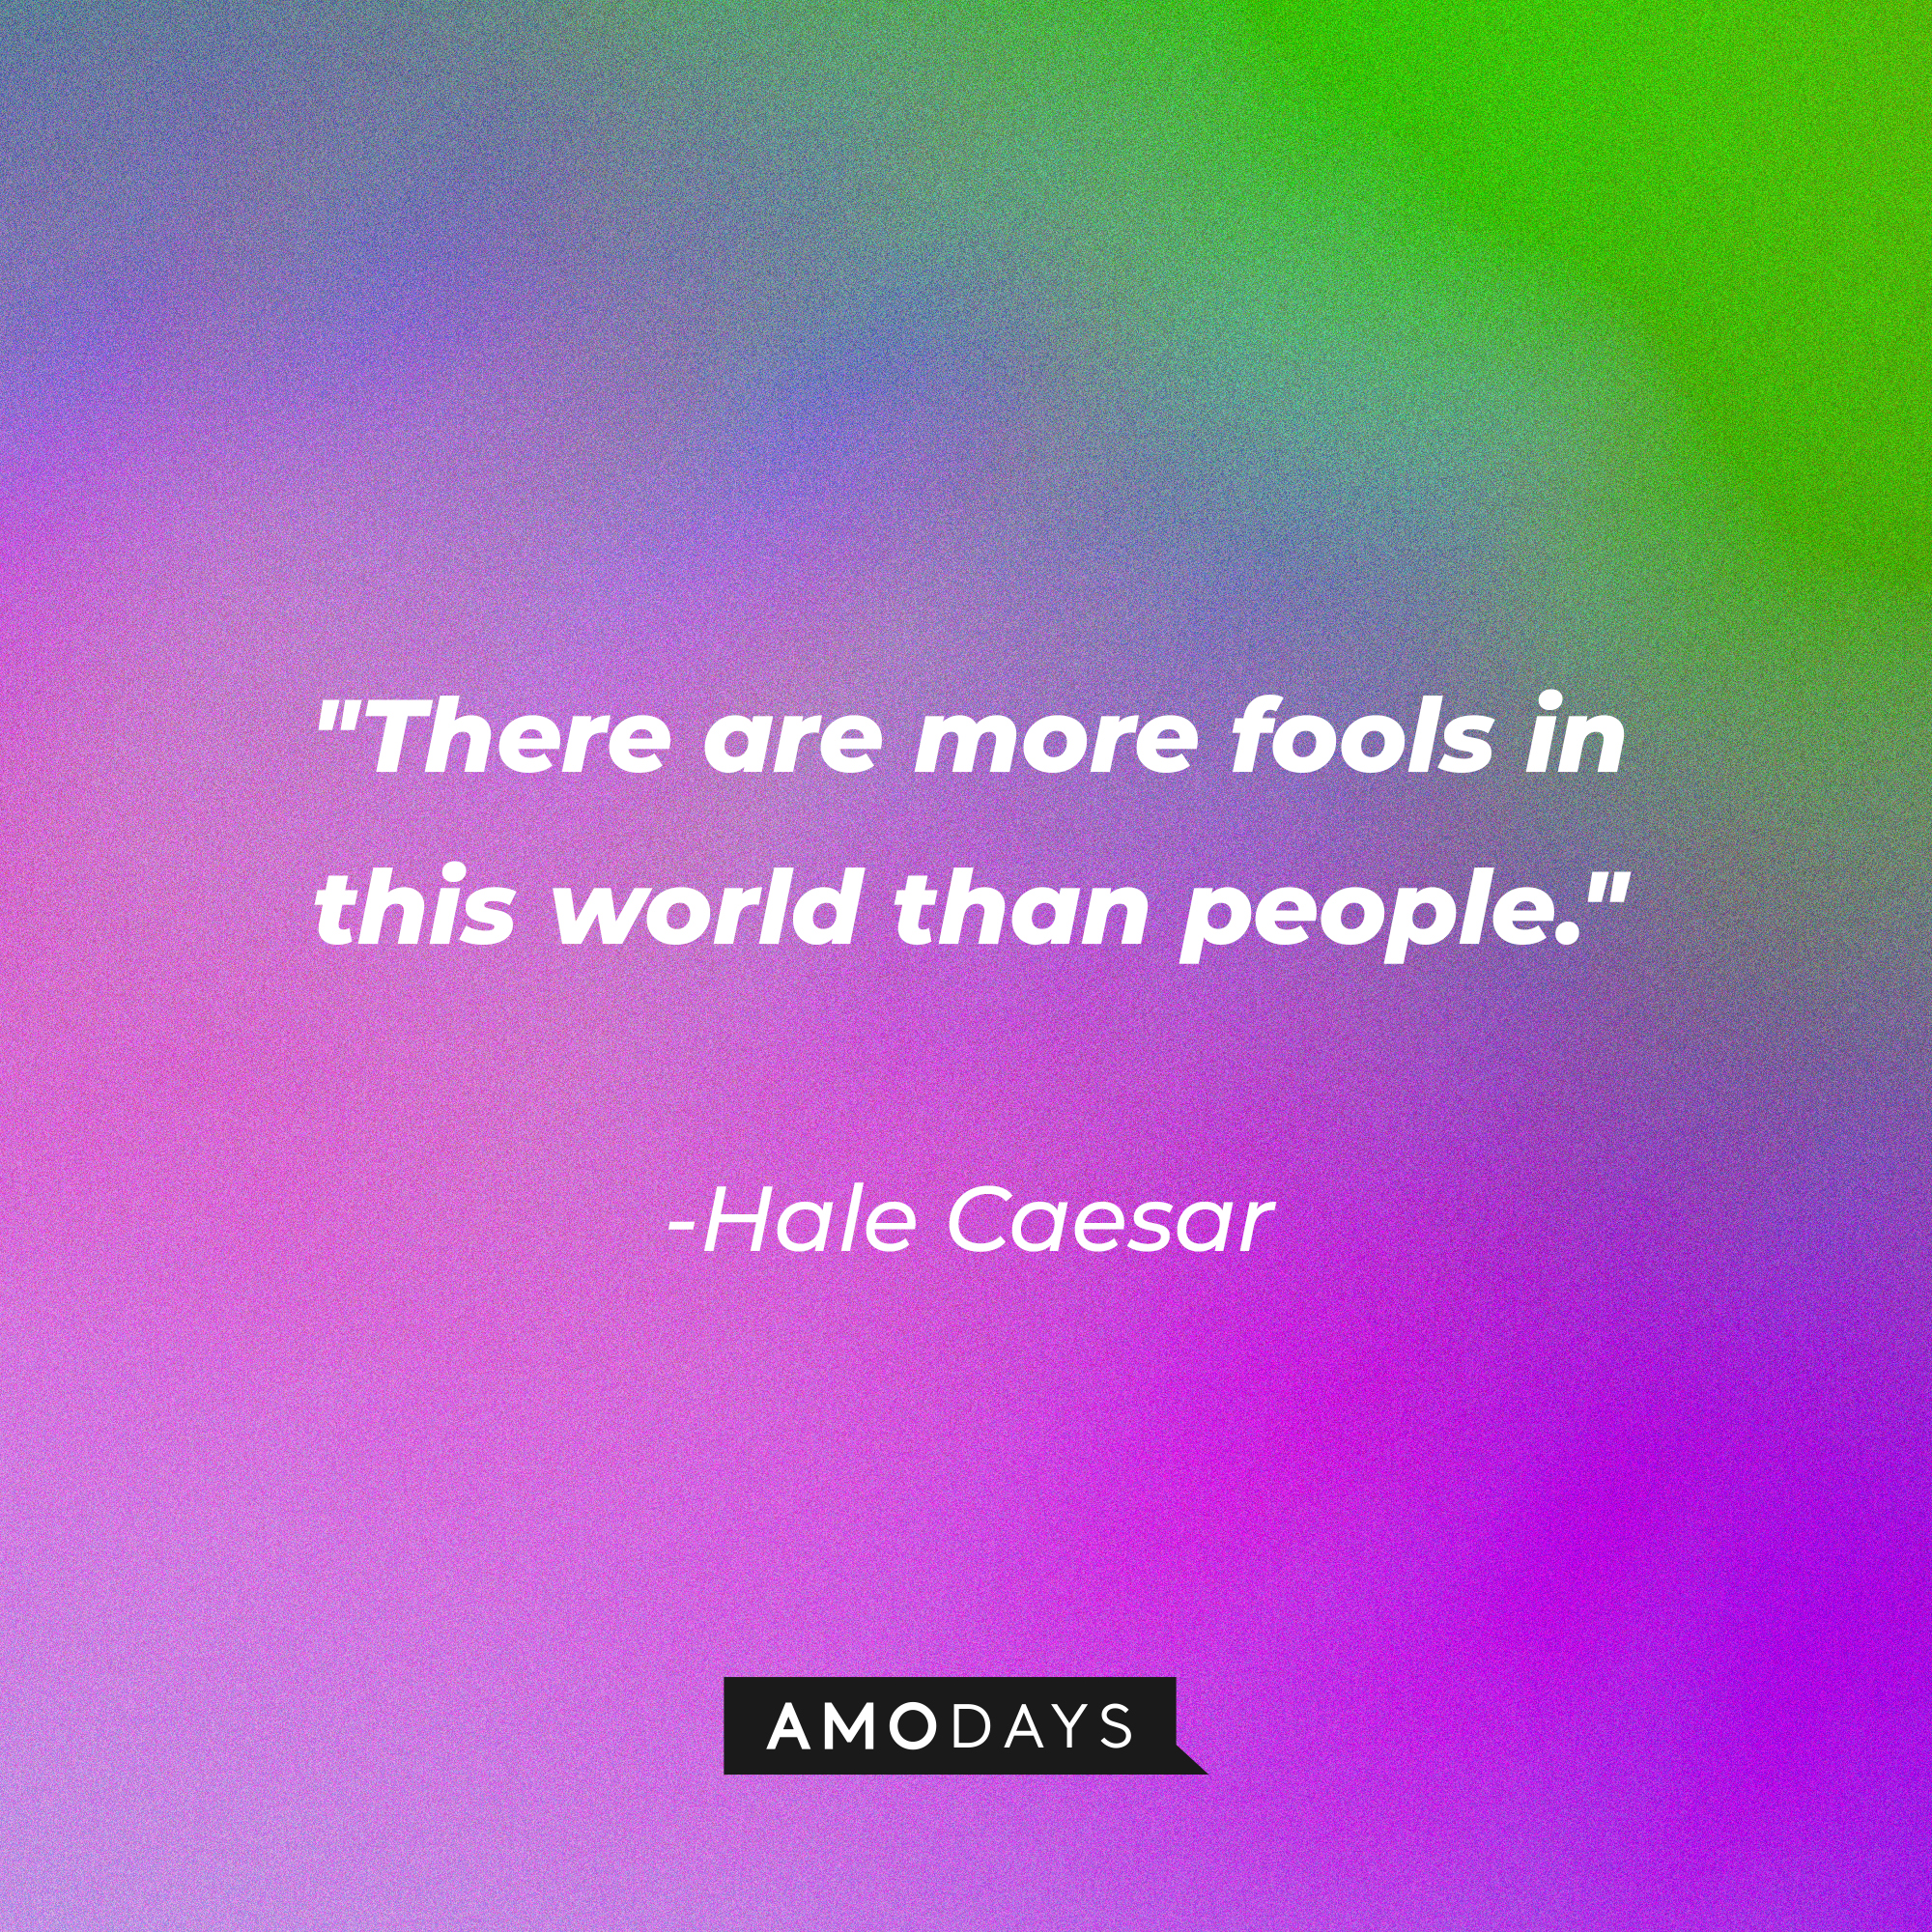 Hale Caesar’s quote: "There are more fools in this world than people." | Source: AmoDays